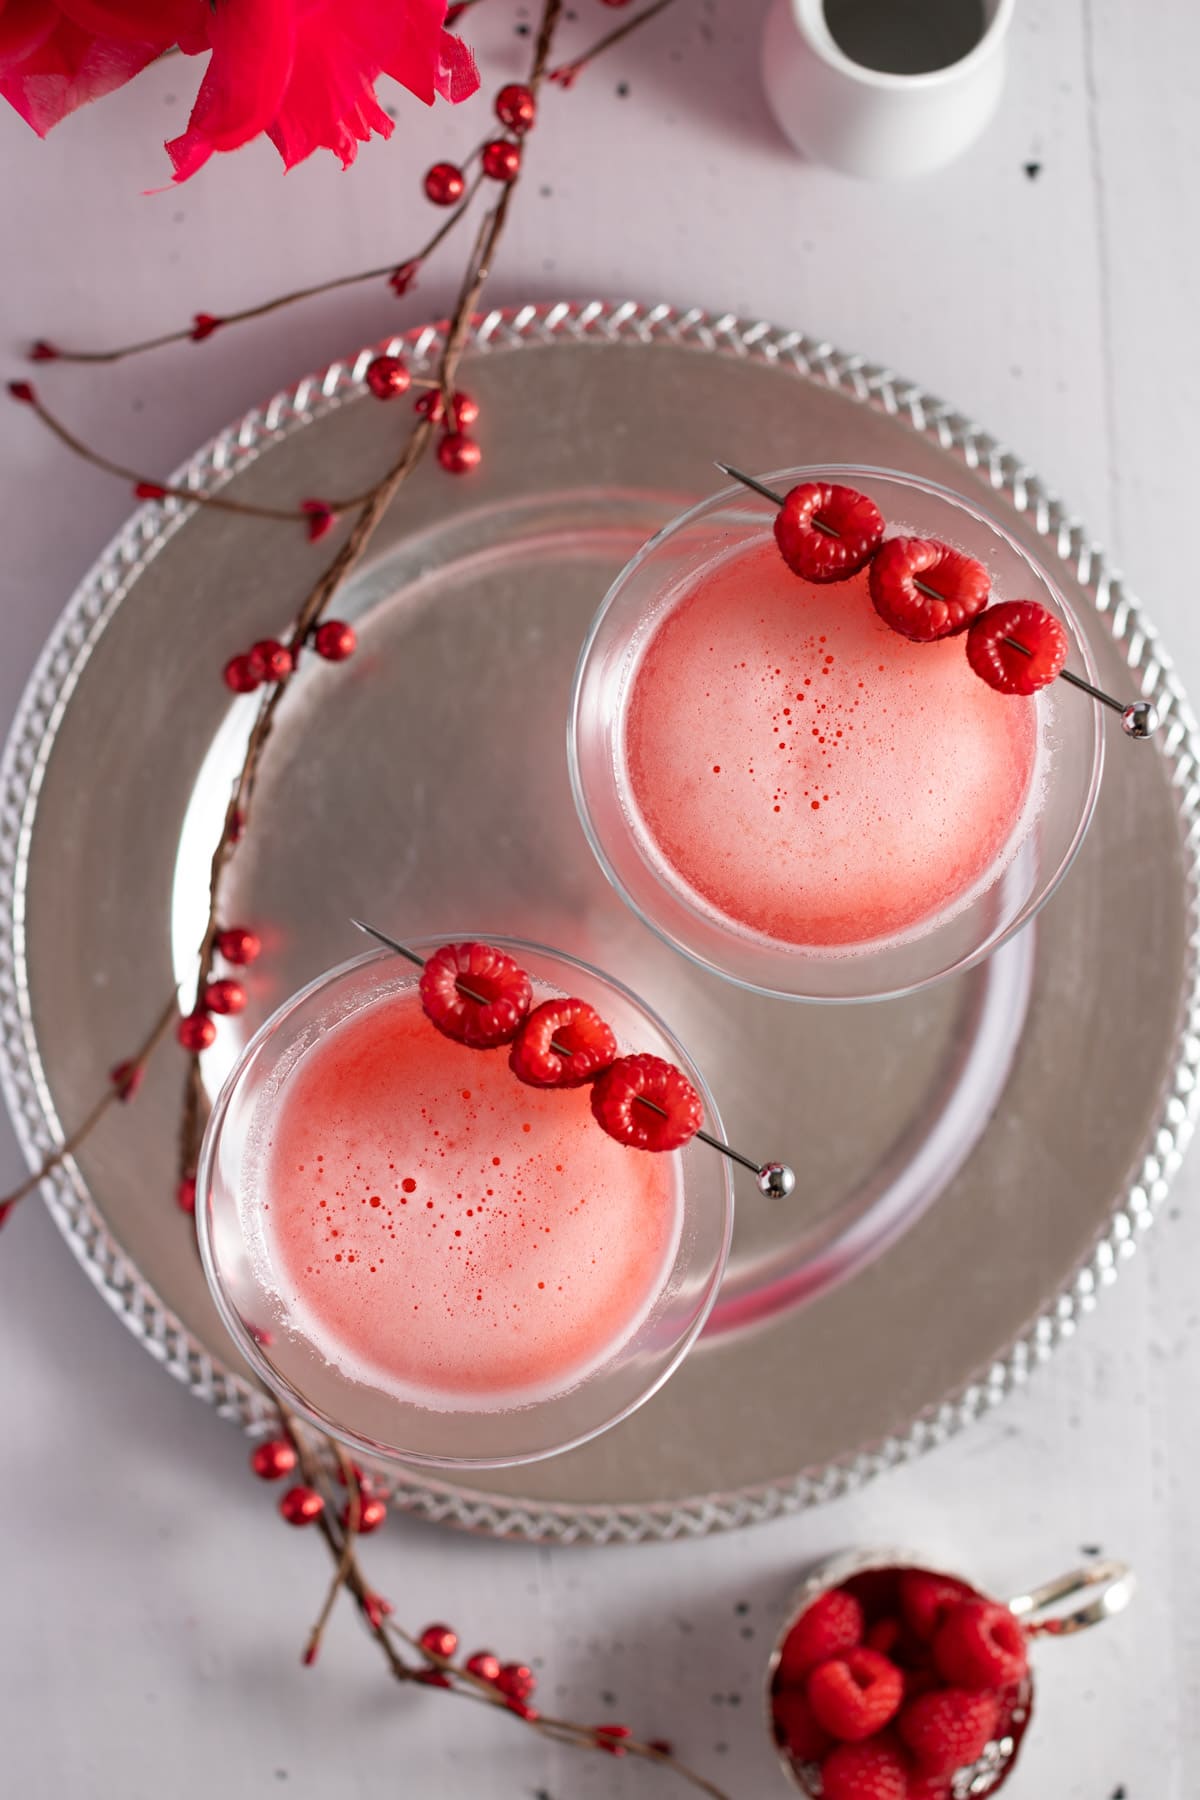 Overhead view of two cocktails on a silver plate, with a red berry garland on the table as decoration.